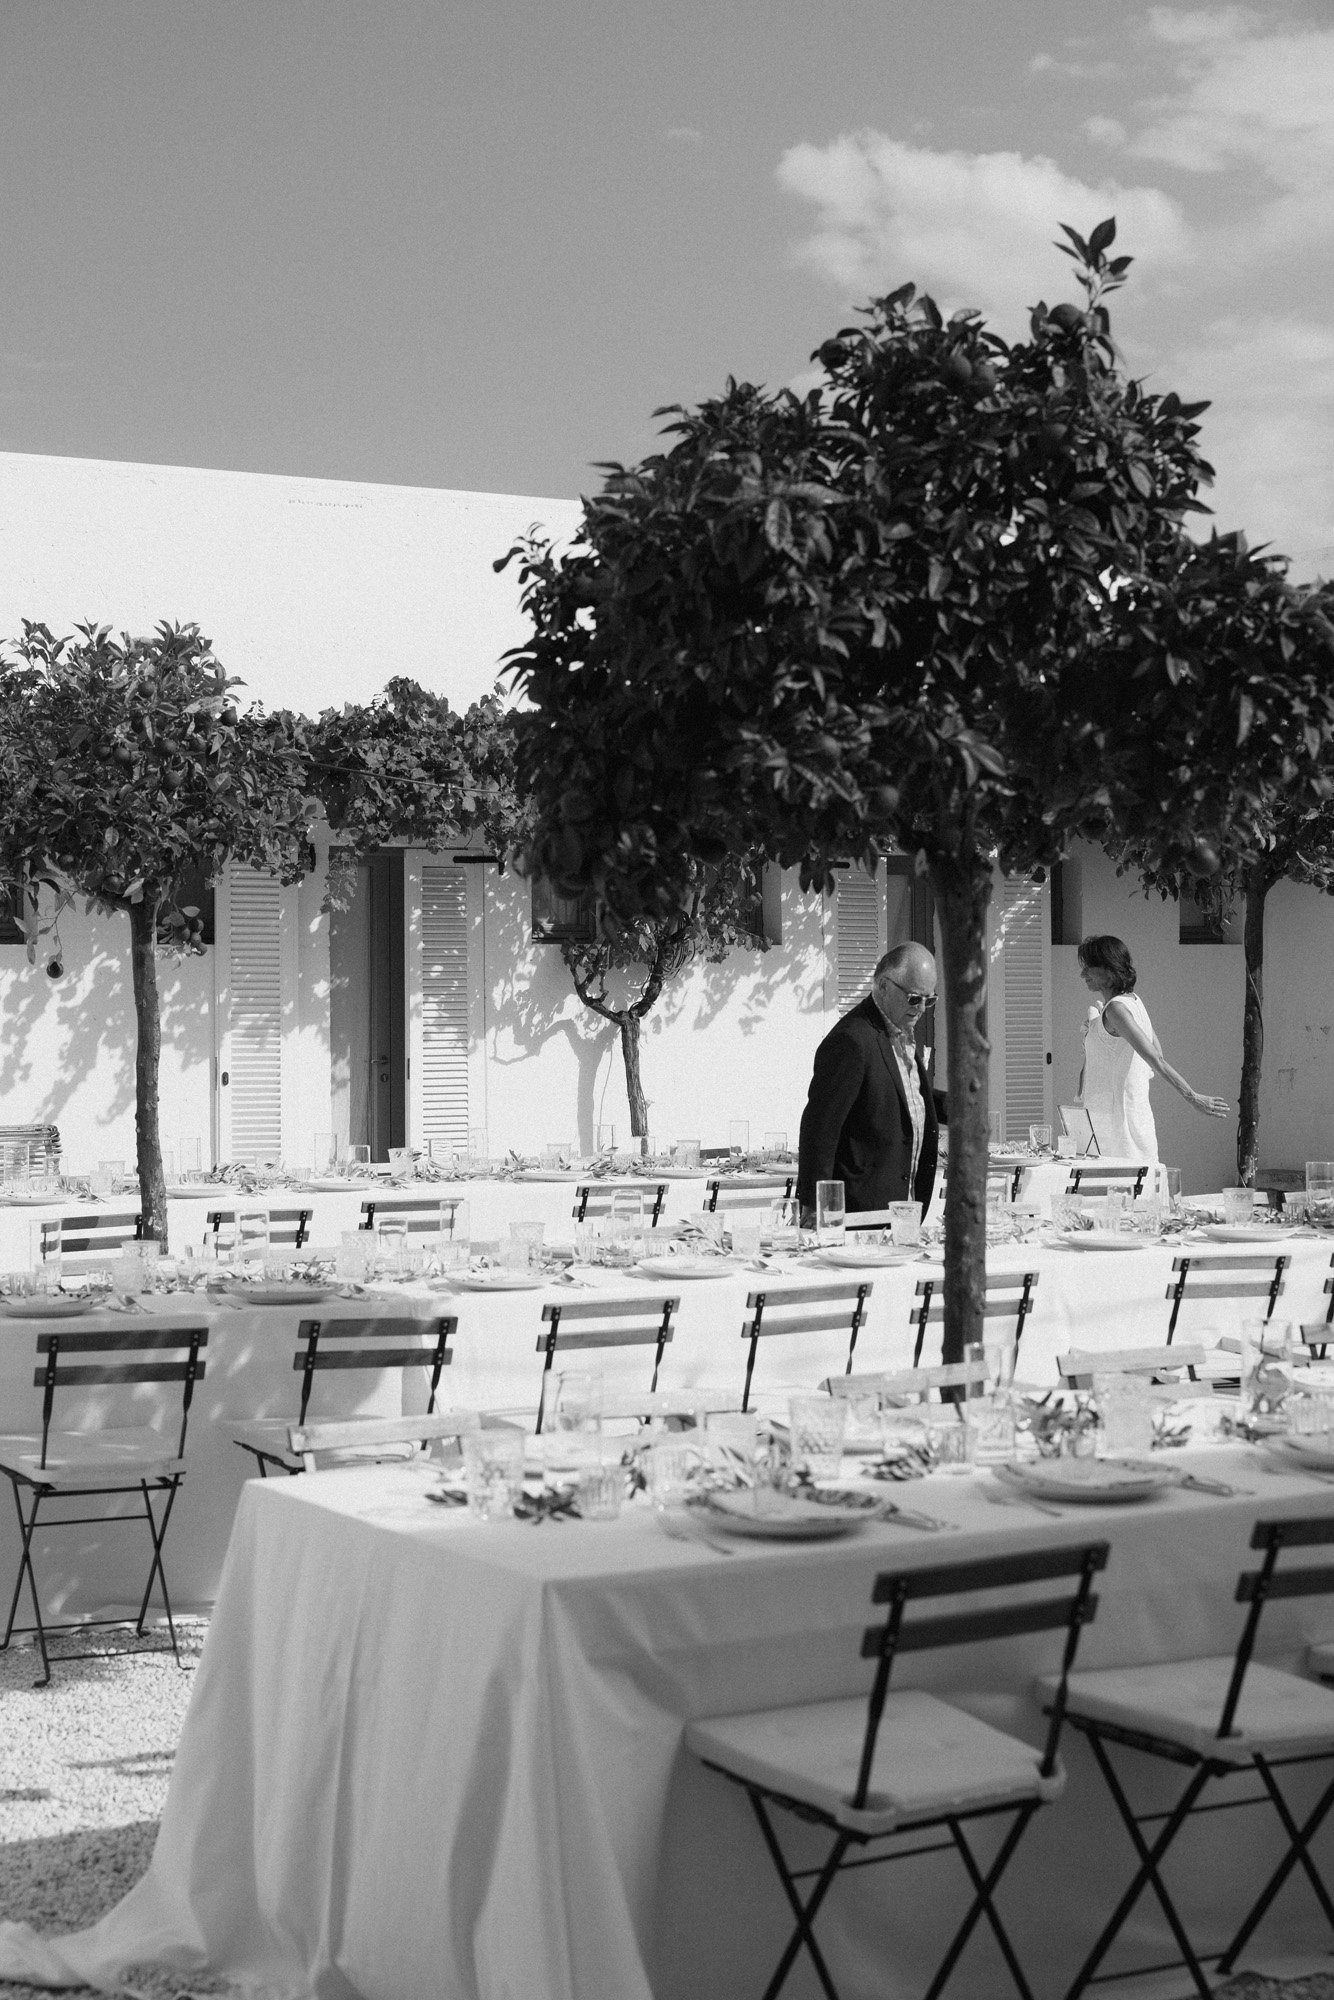  a chic and modern wedding reception in italy with olive trees and folding chairs in an effortless black and white photo. 